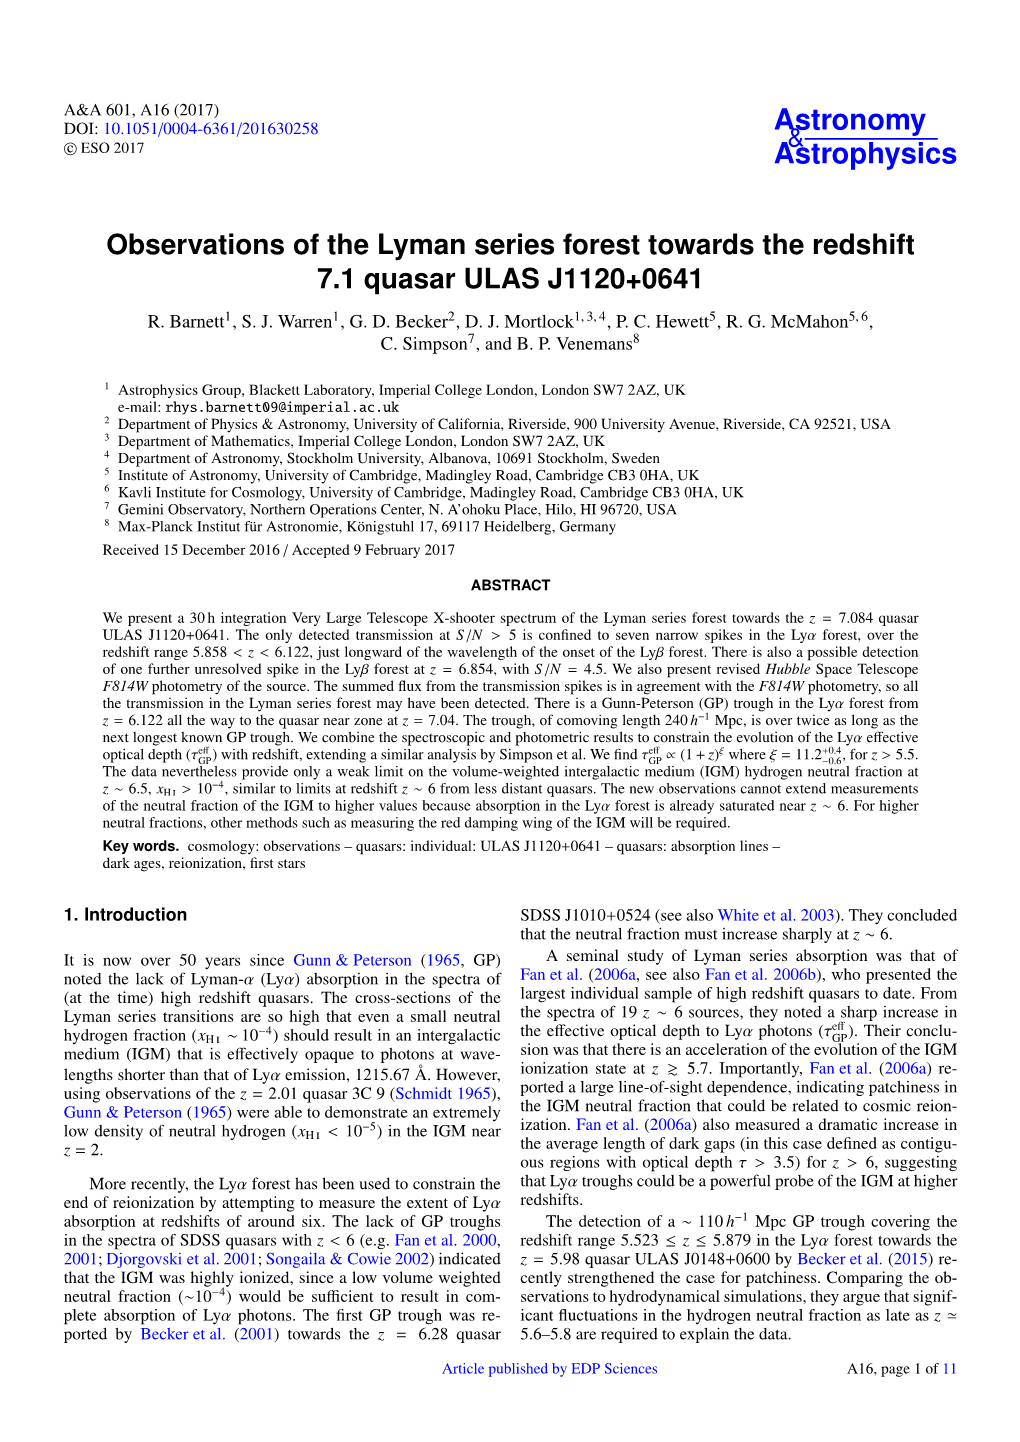 Observations of the Lyman Series Forest Towards the Redshift 7.1 Quasar ULAS J1120+0641 R